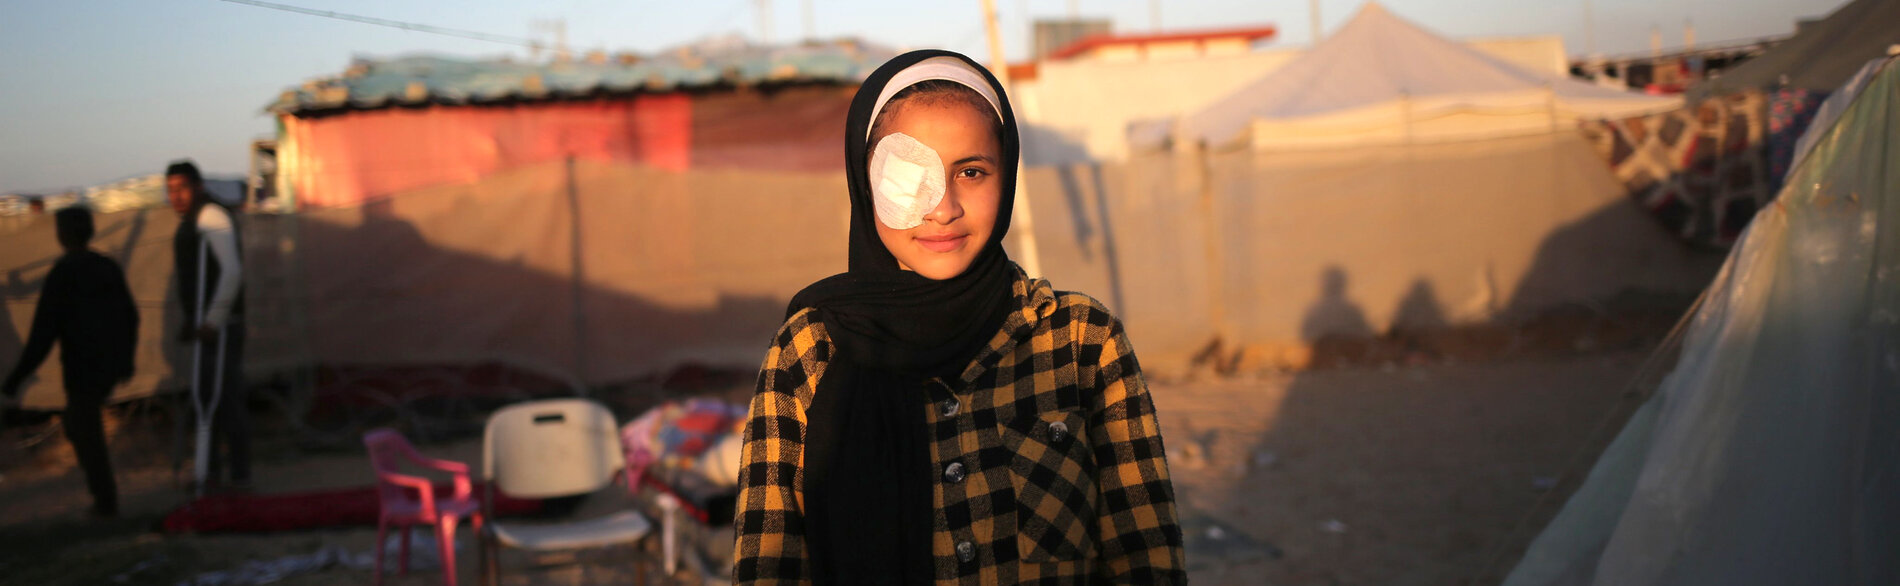 Abrar, 15-year-old, who was hit by shrapnel. “When my house was bombed and destroyed, two of my brothers were killed, and a third one was injured. Some shrapnel hit my right eye, causing weak eyesight and constant tears.” Photo by UNICEF